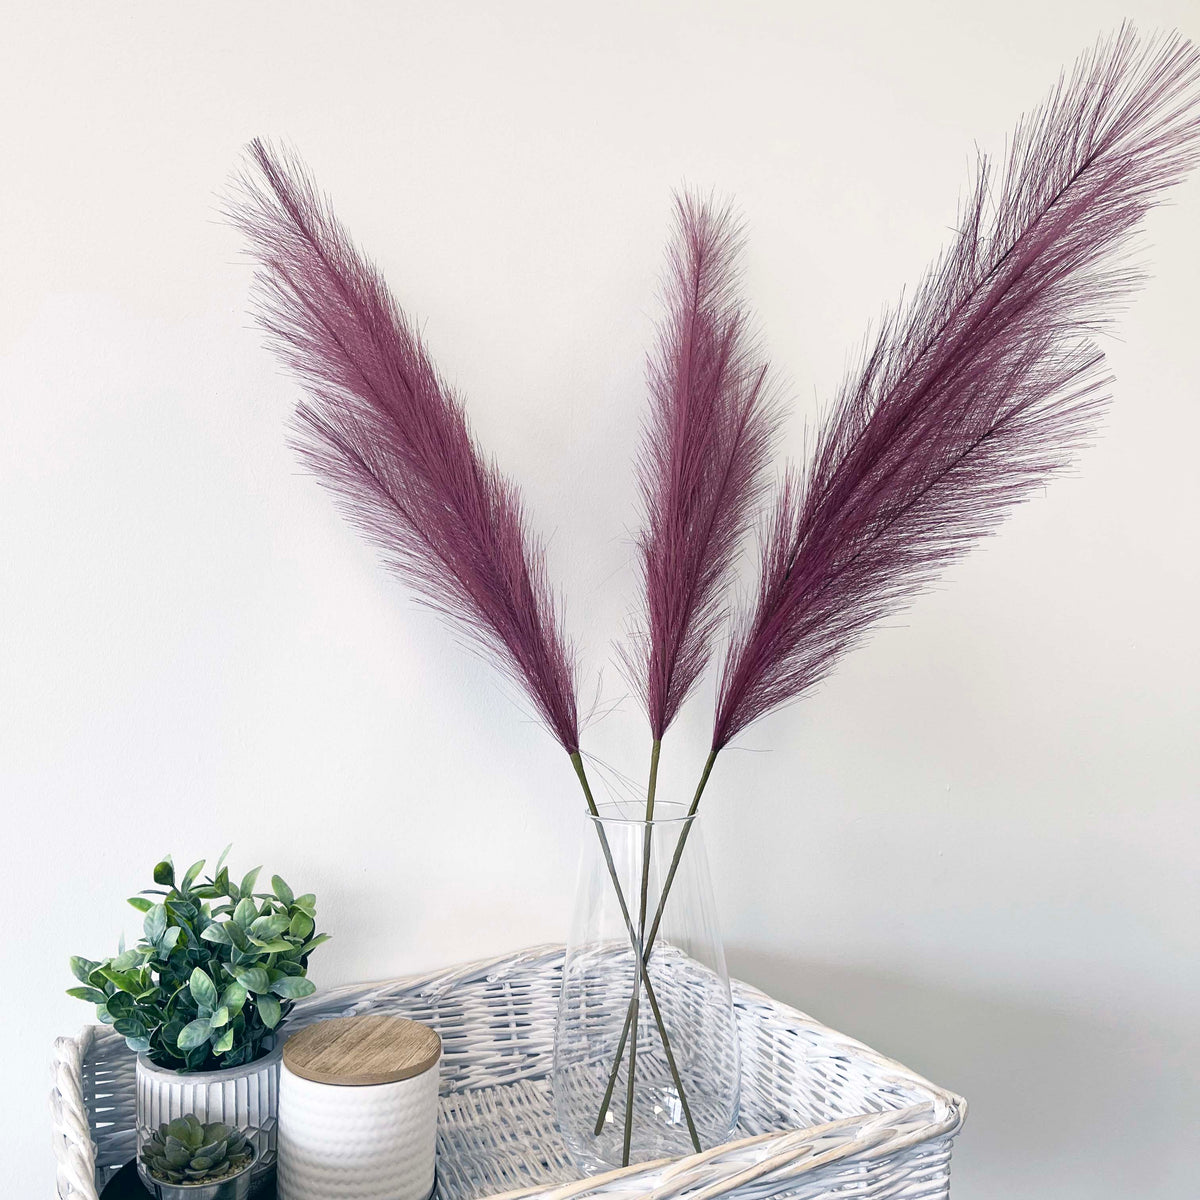 Scarlet Red Faux Pampas Grass Stem in a glass vase, sitting in a wicker table, on a white background.